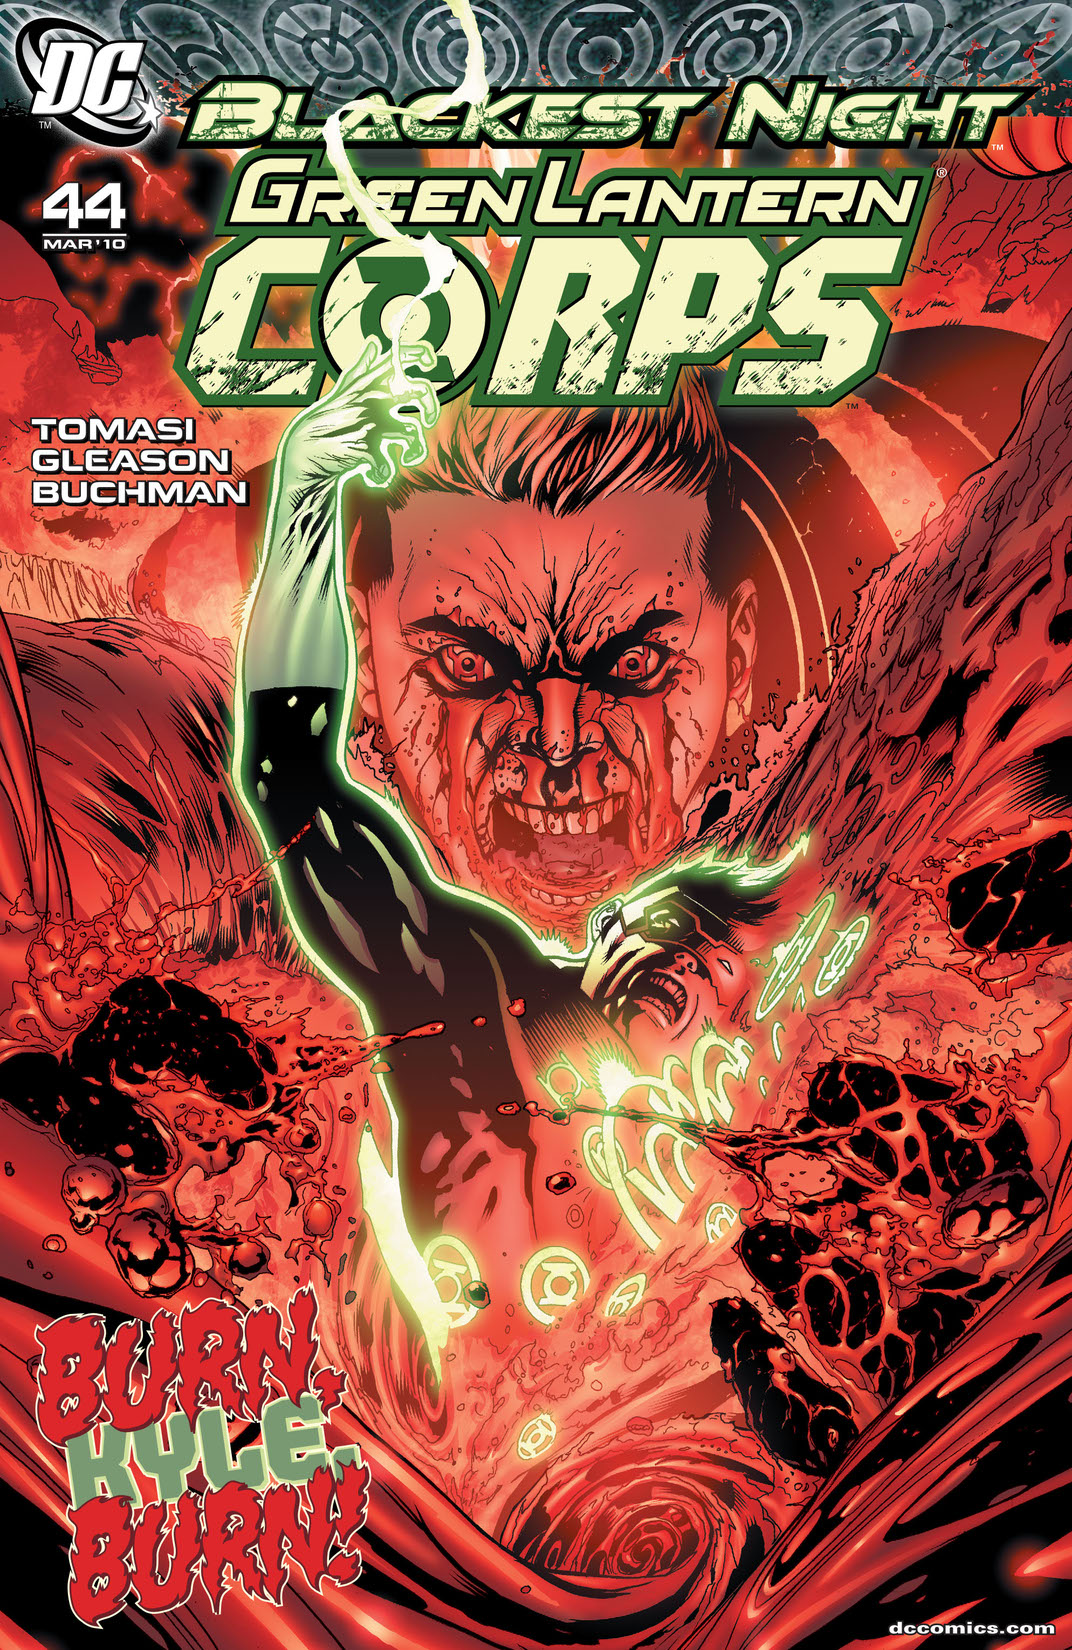 Green Lantern Corps (2006-) #44 preview images